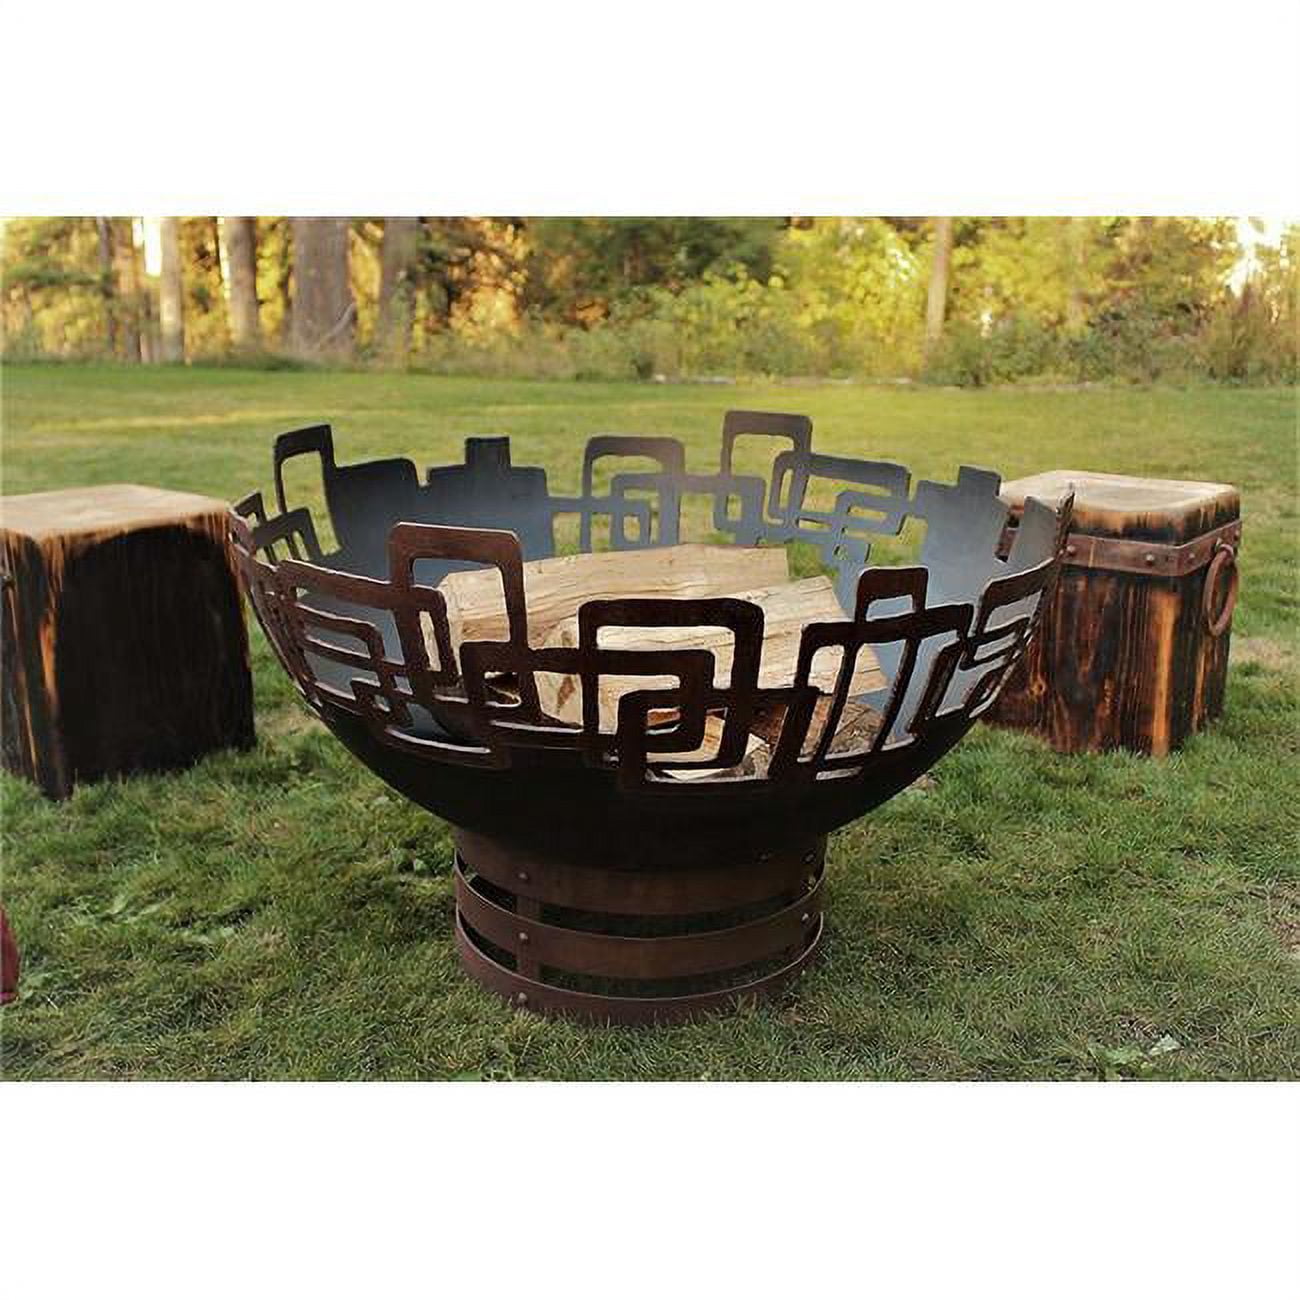 20009-lpei Prevailing Links Electronic Ignition Propane Fire Pit